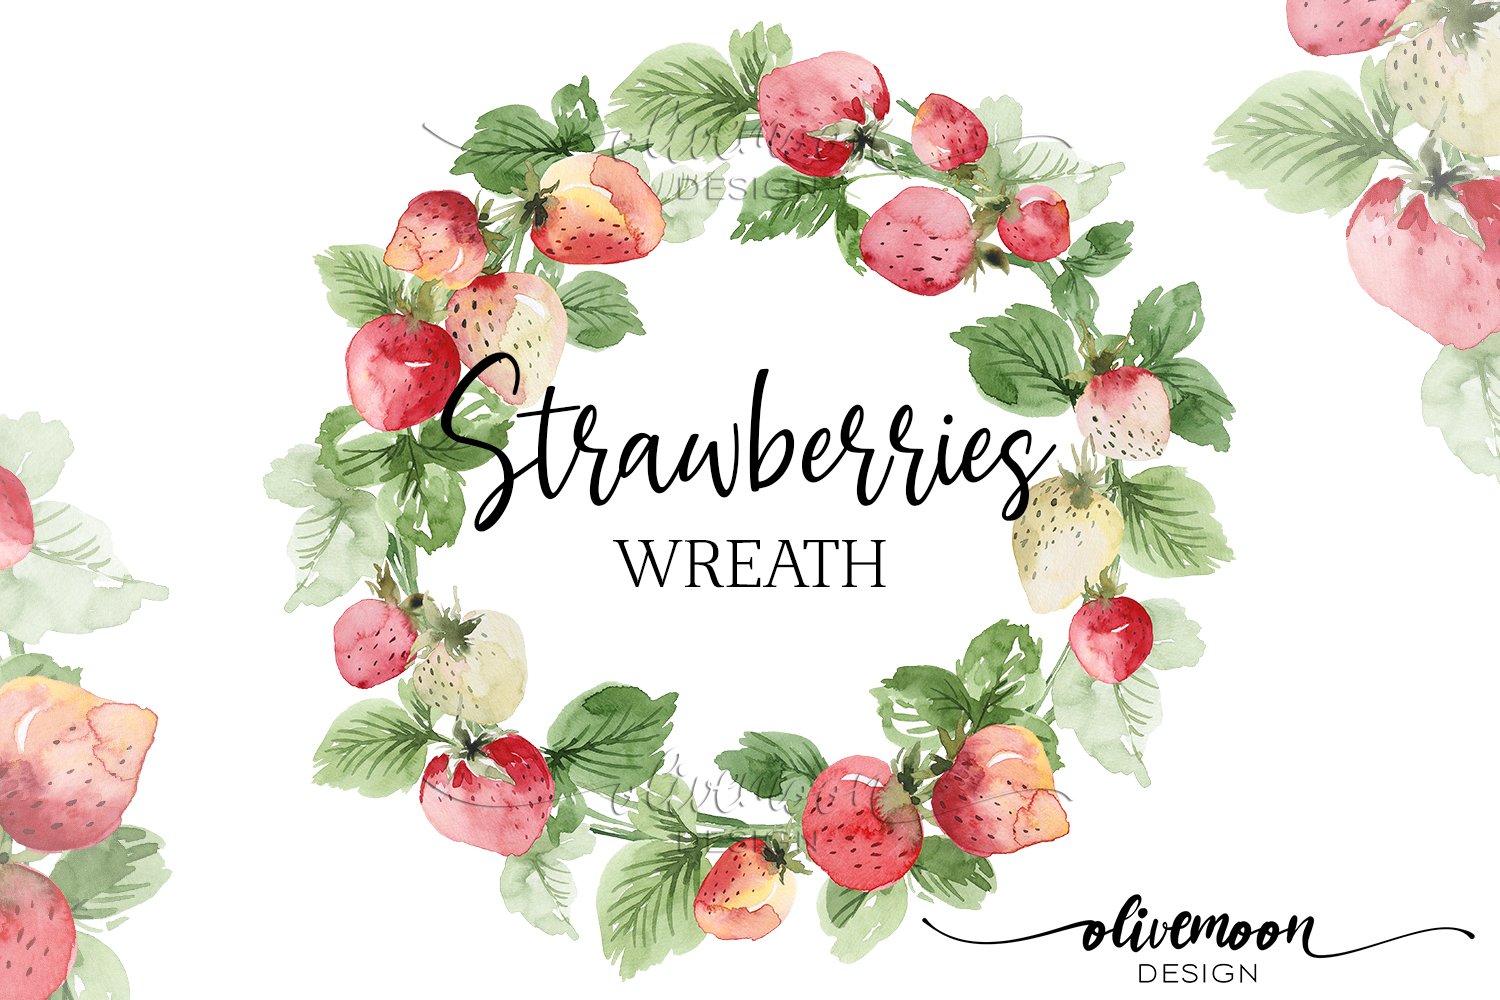 Black lettering "Strawberry Wreath" and illustration of a strawberry wreath.